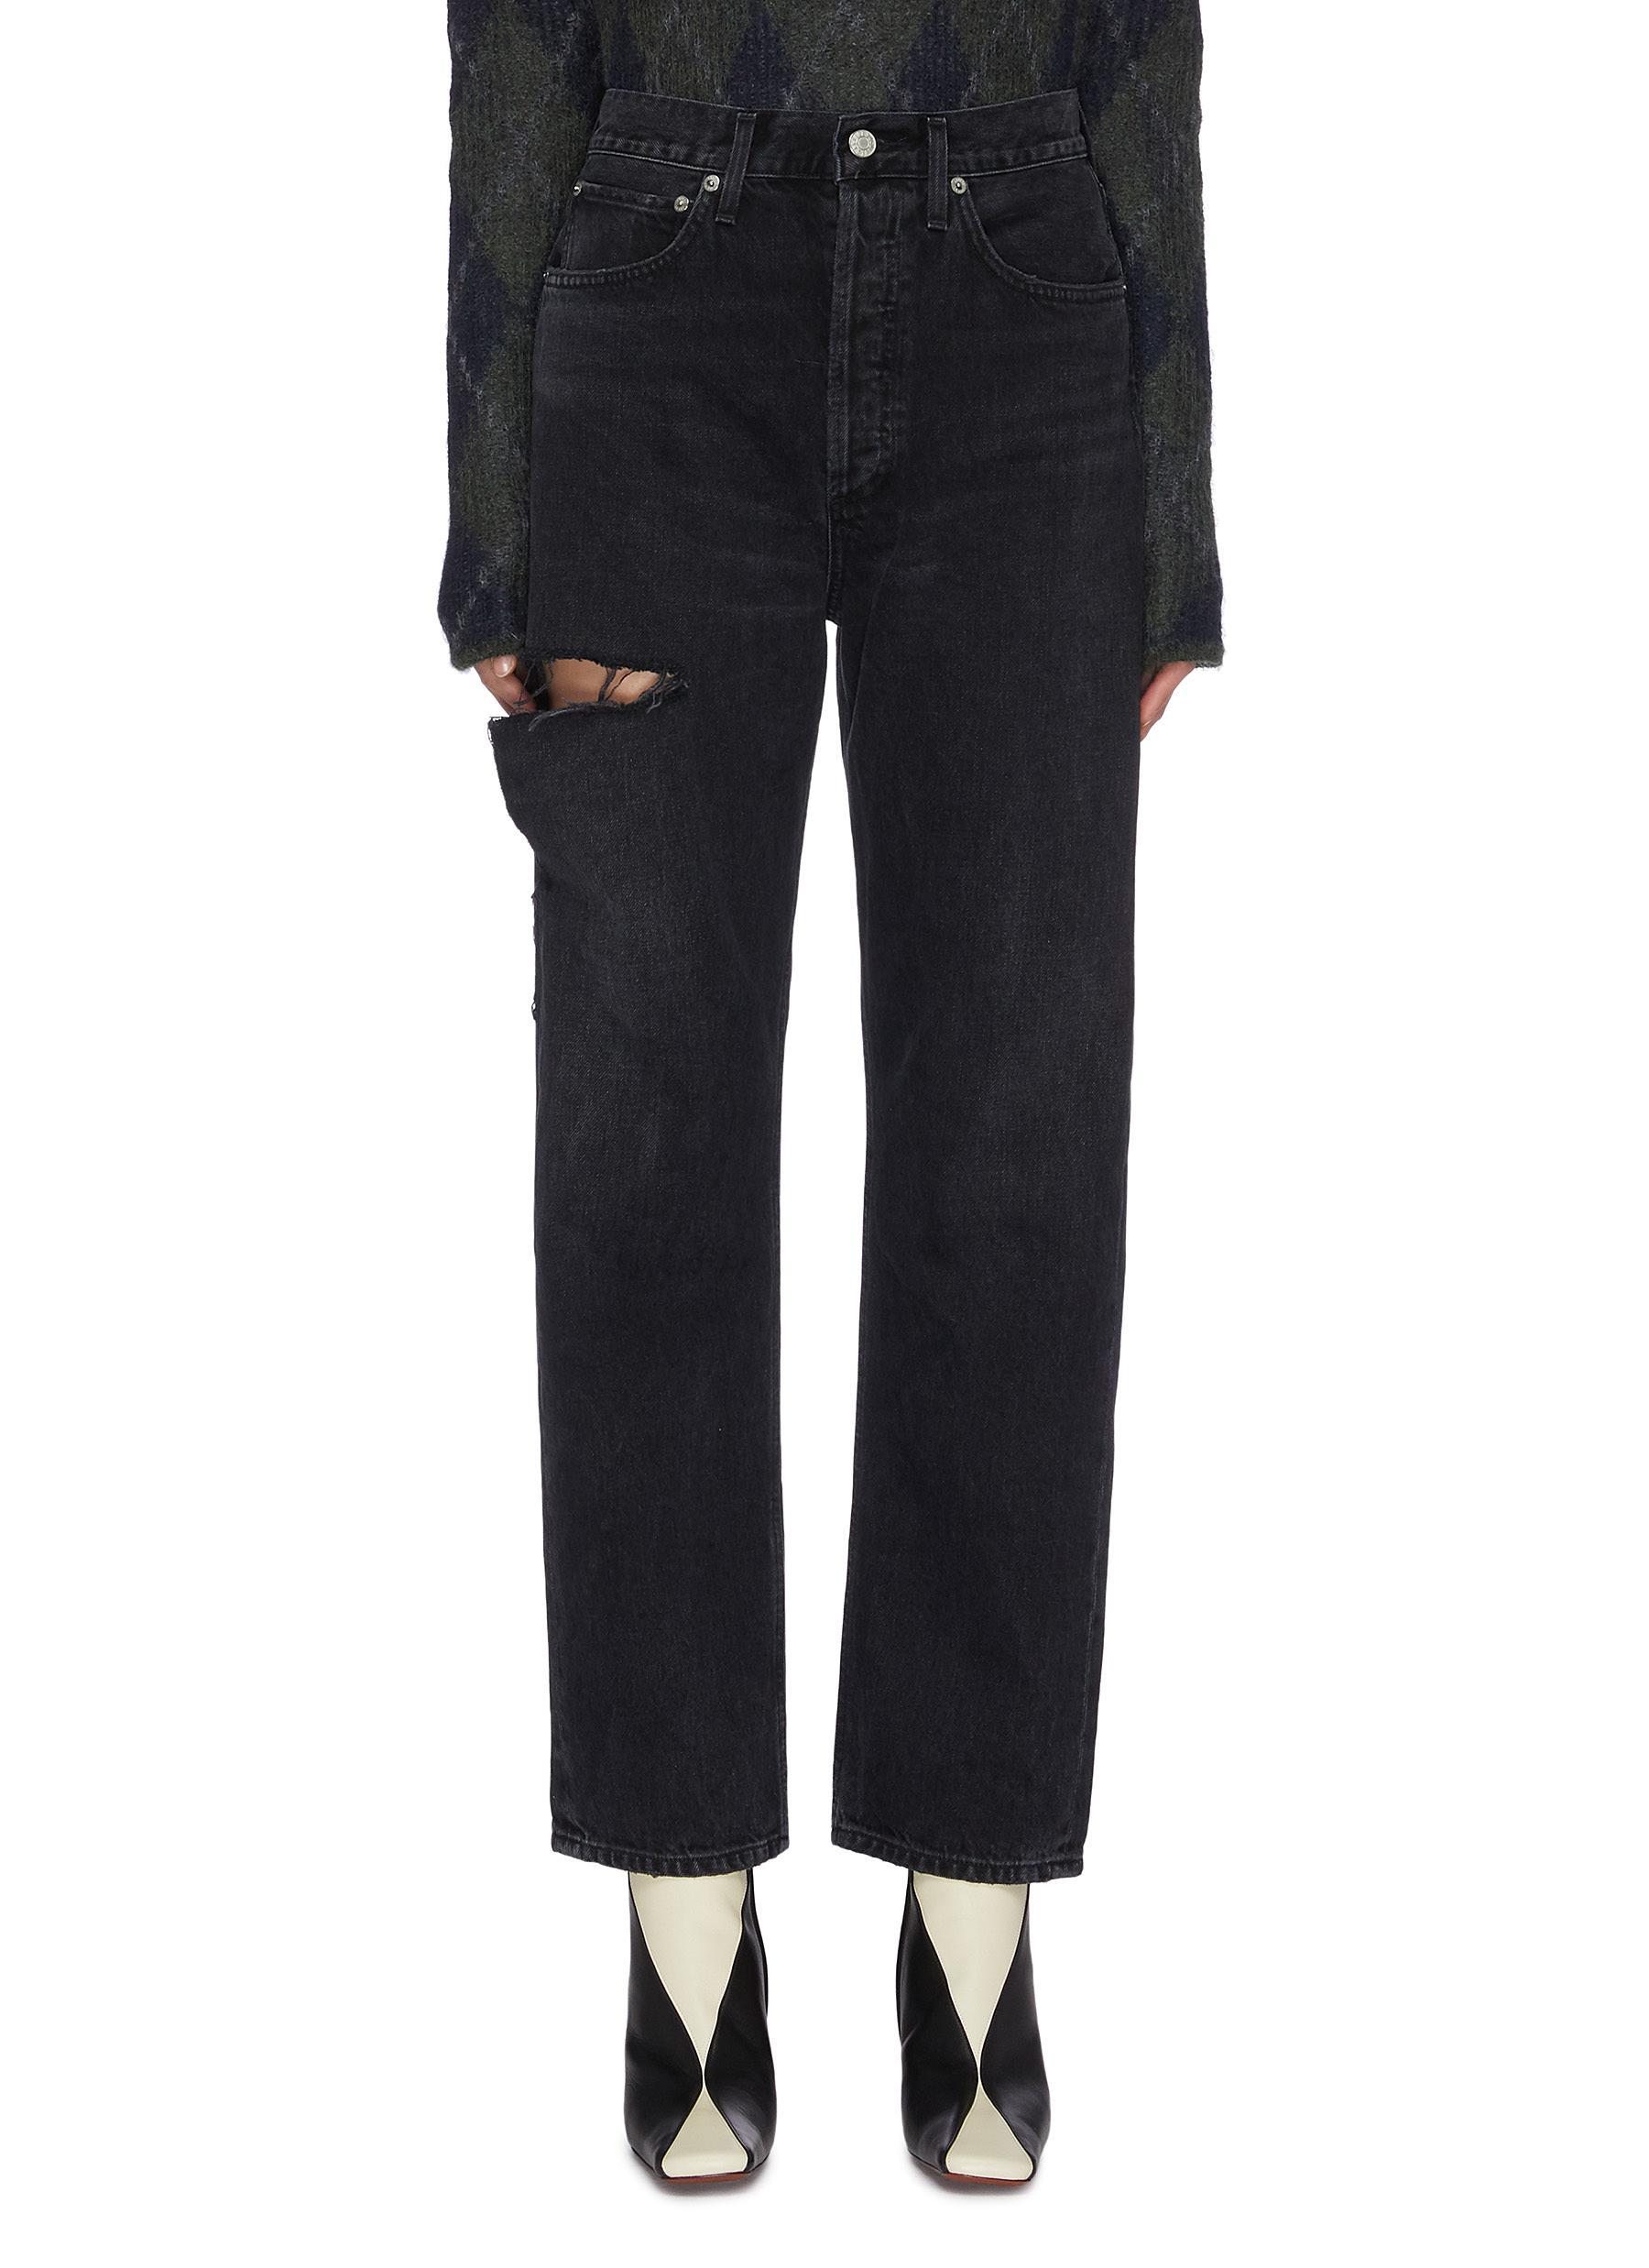 Agolde '90s' Ripped Thigh Straight Leg Jeans in Black | Lyst